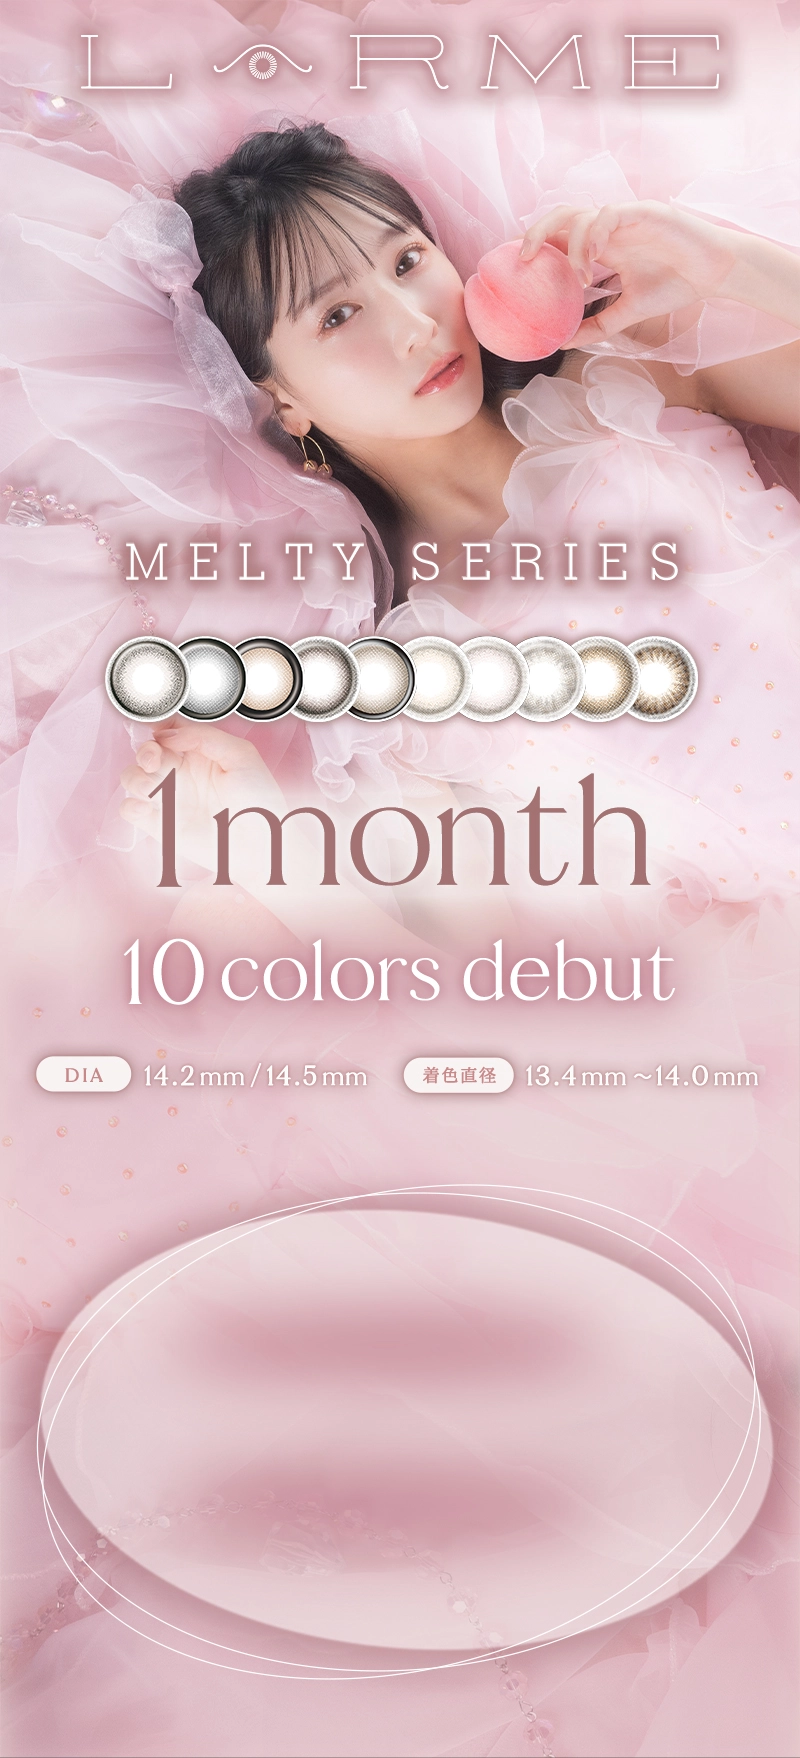 MELTY SERIES 1month 10colors debut